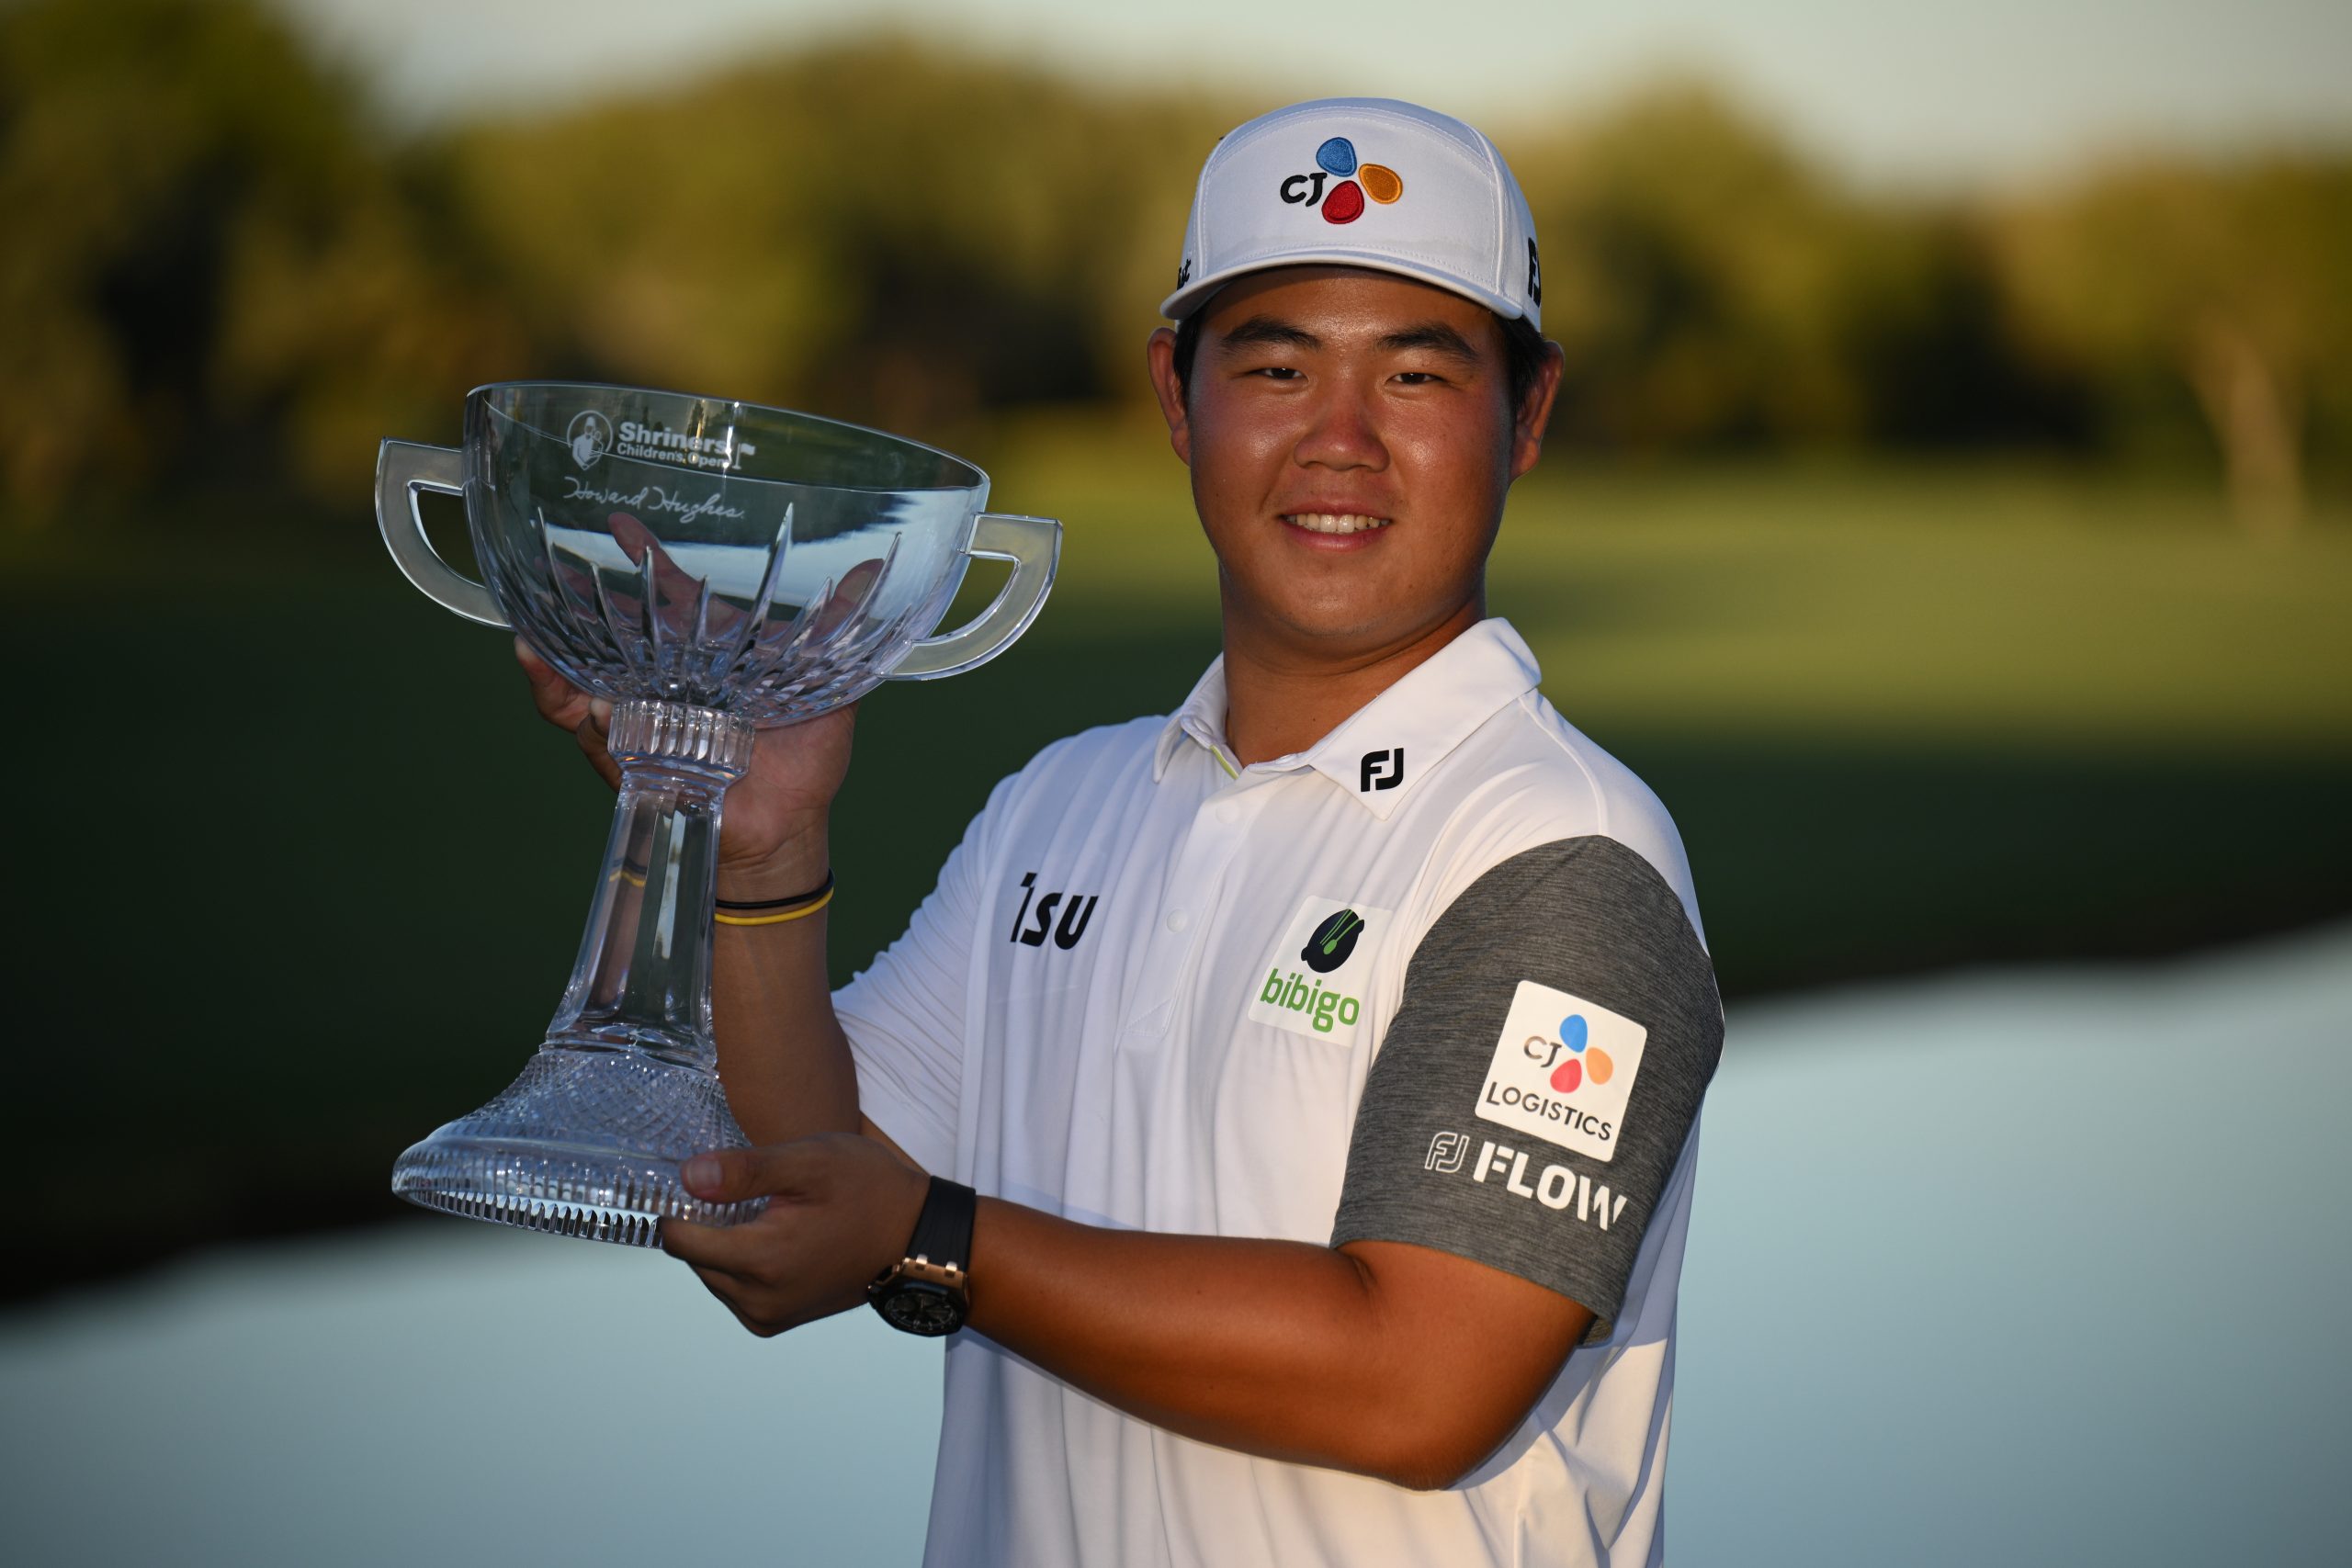 Young star Tom Kim outlasts Cantlay, joins Woods in elite company to have won two titles before 21 years